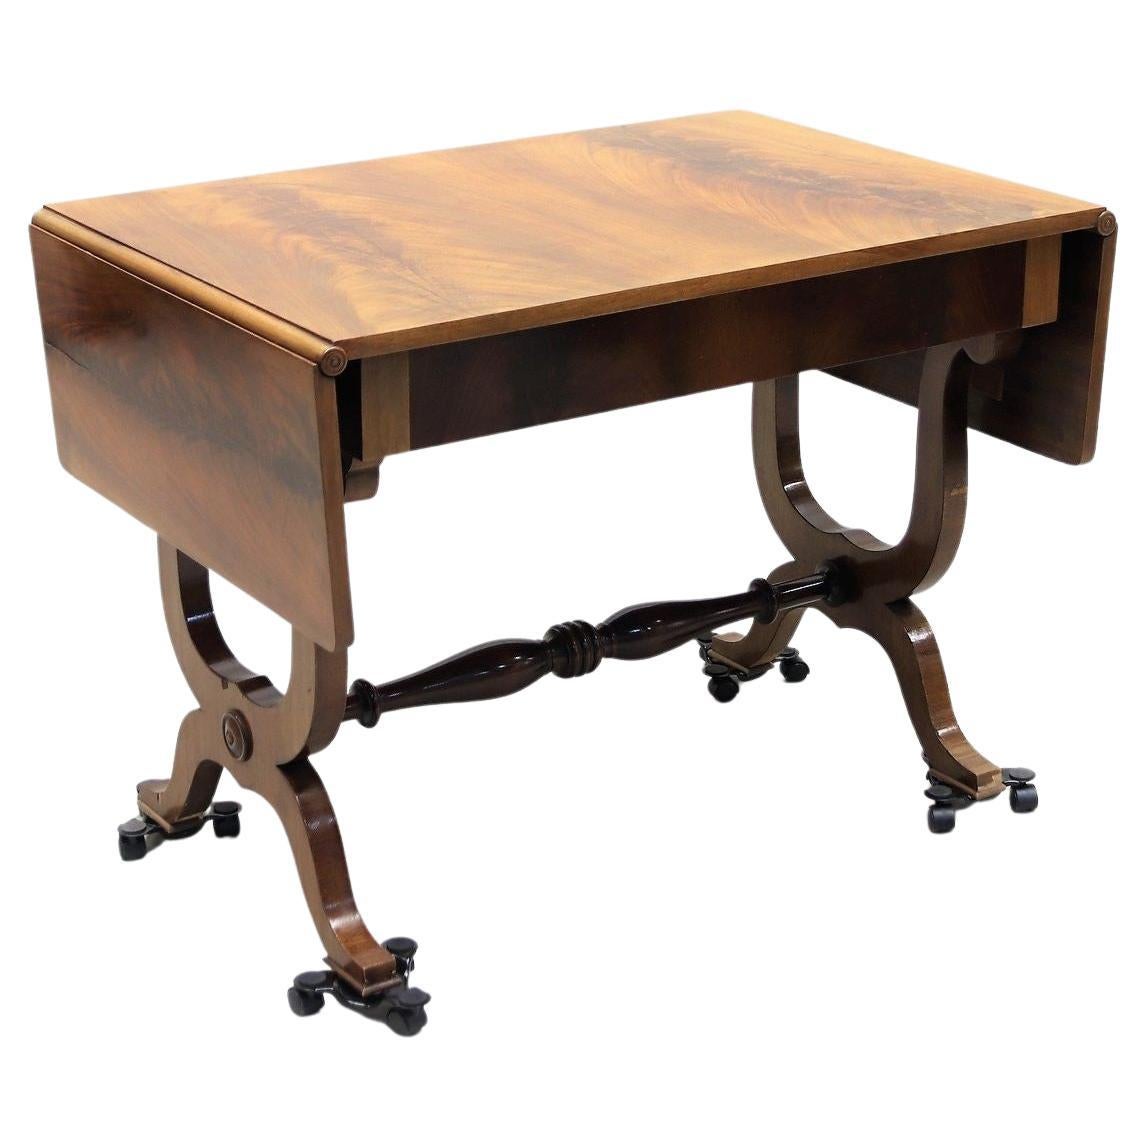 1900s Empire-Style Desk with Gorgeous Veneer Wood Grain Detail & Carved Legs For Sale